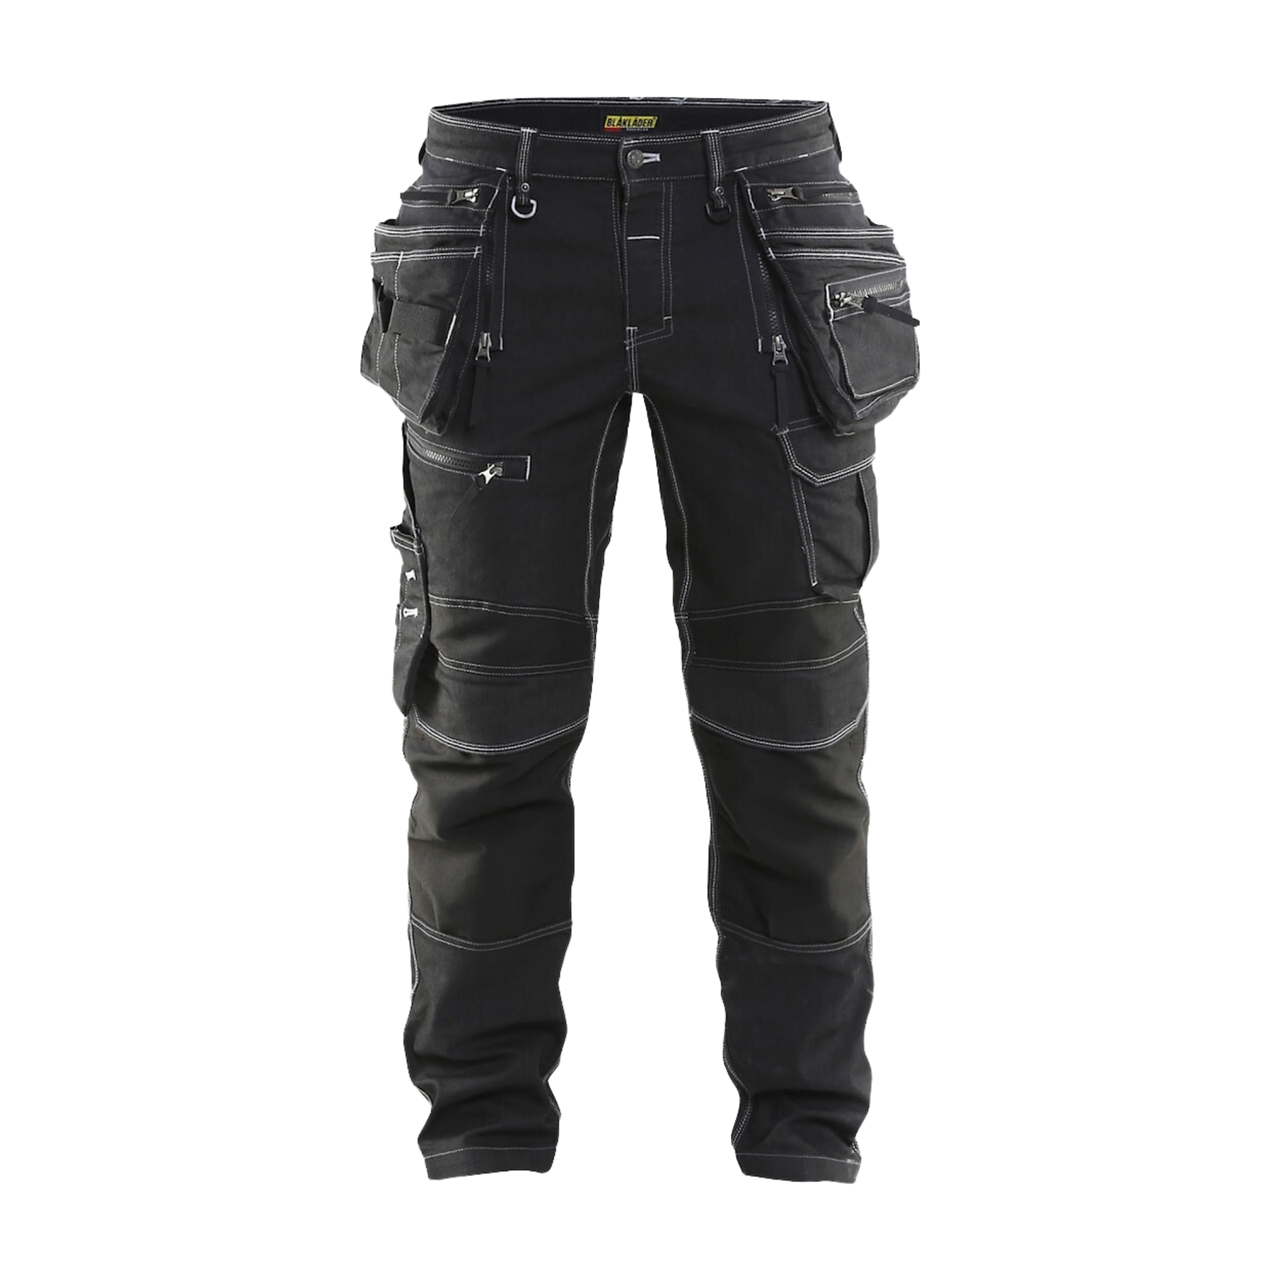 Find a range of  Mens Work Trousers and Work Pants in our range and from other brands such as Snickers Workwear in Perth and Sydney at Craftsman Hardware